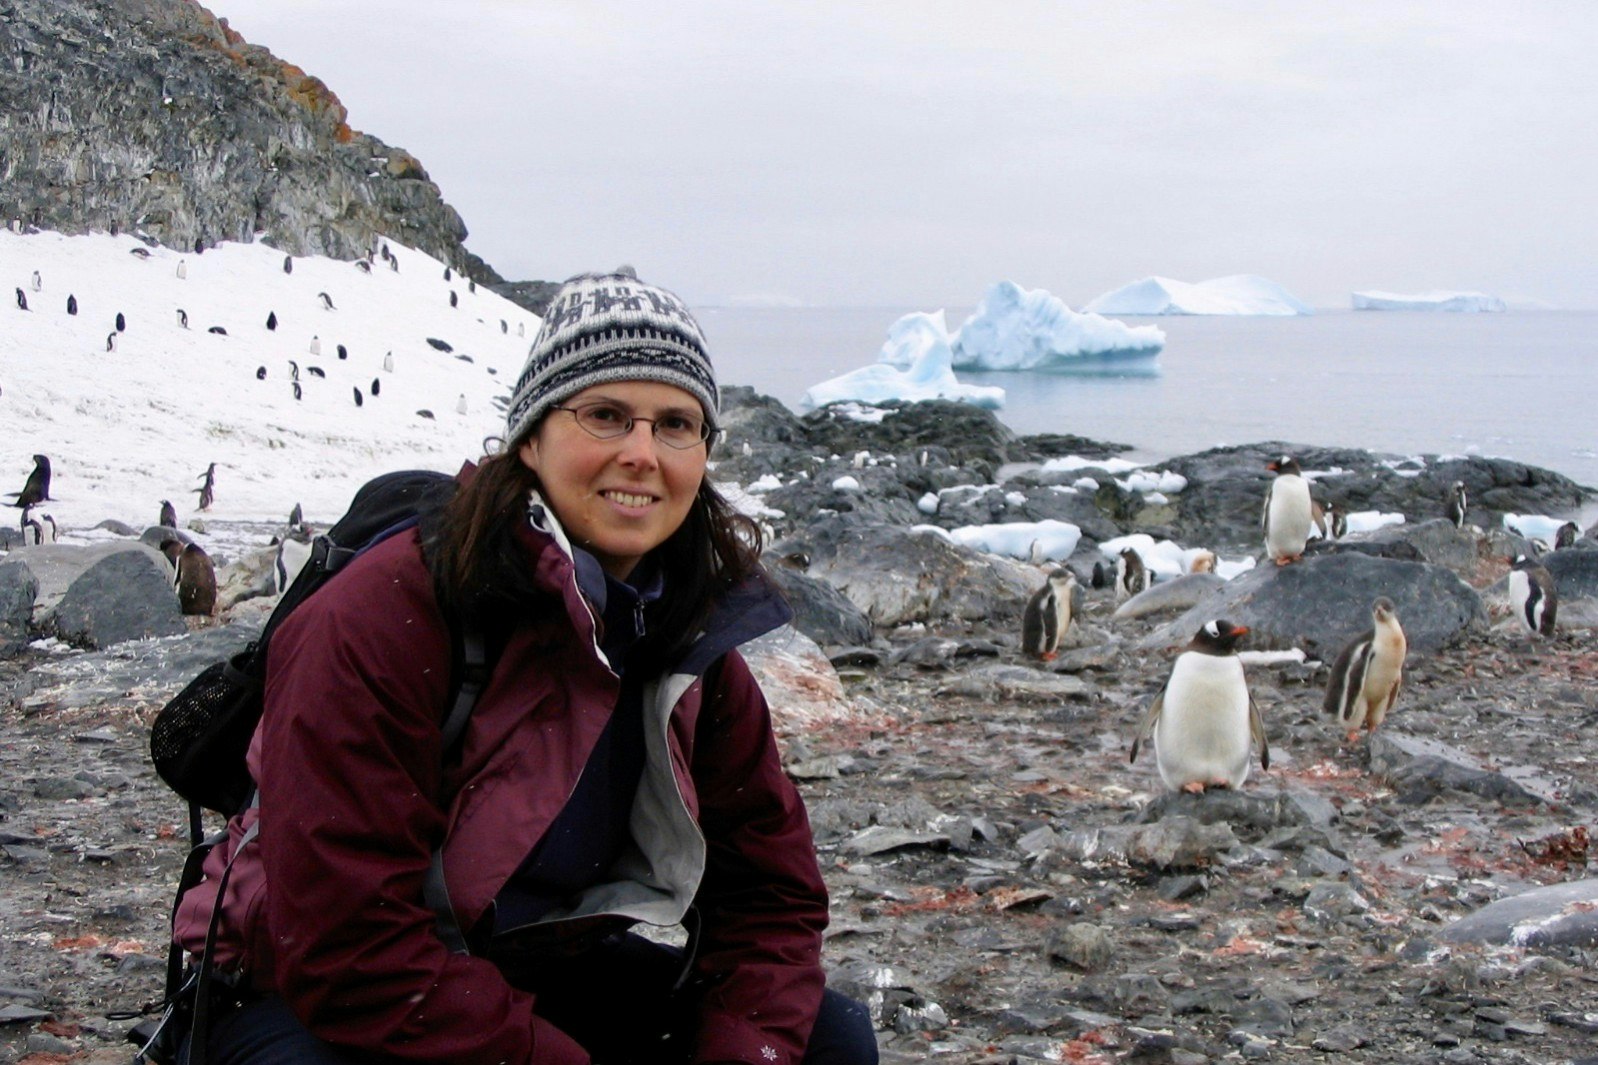 Marie-France poses next to some penguins near the coastline in Antarctica 